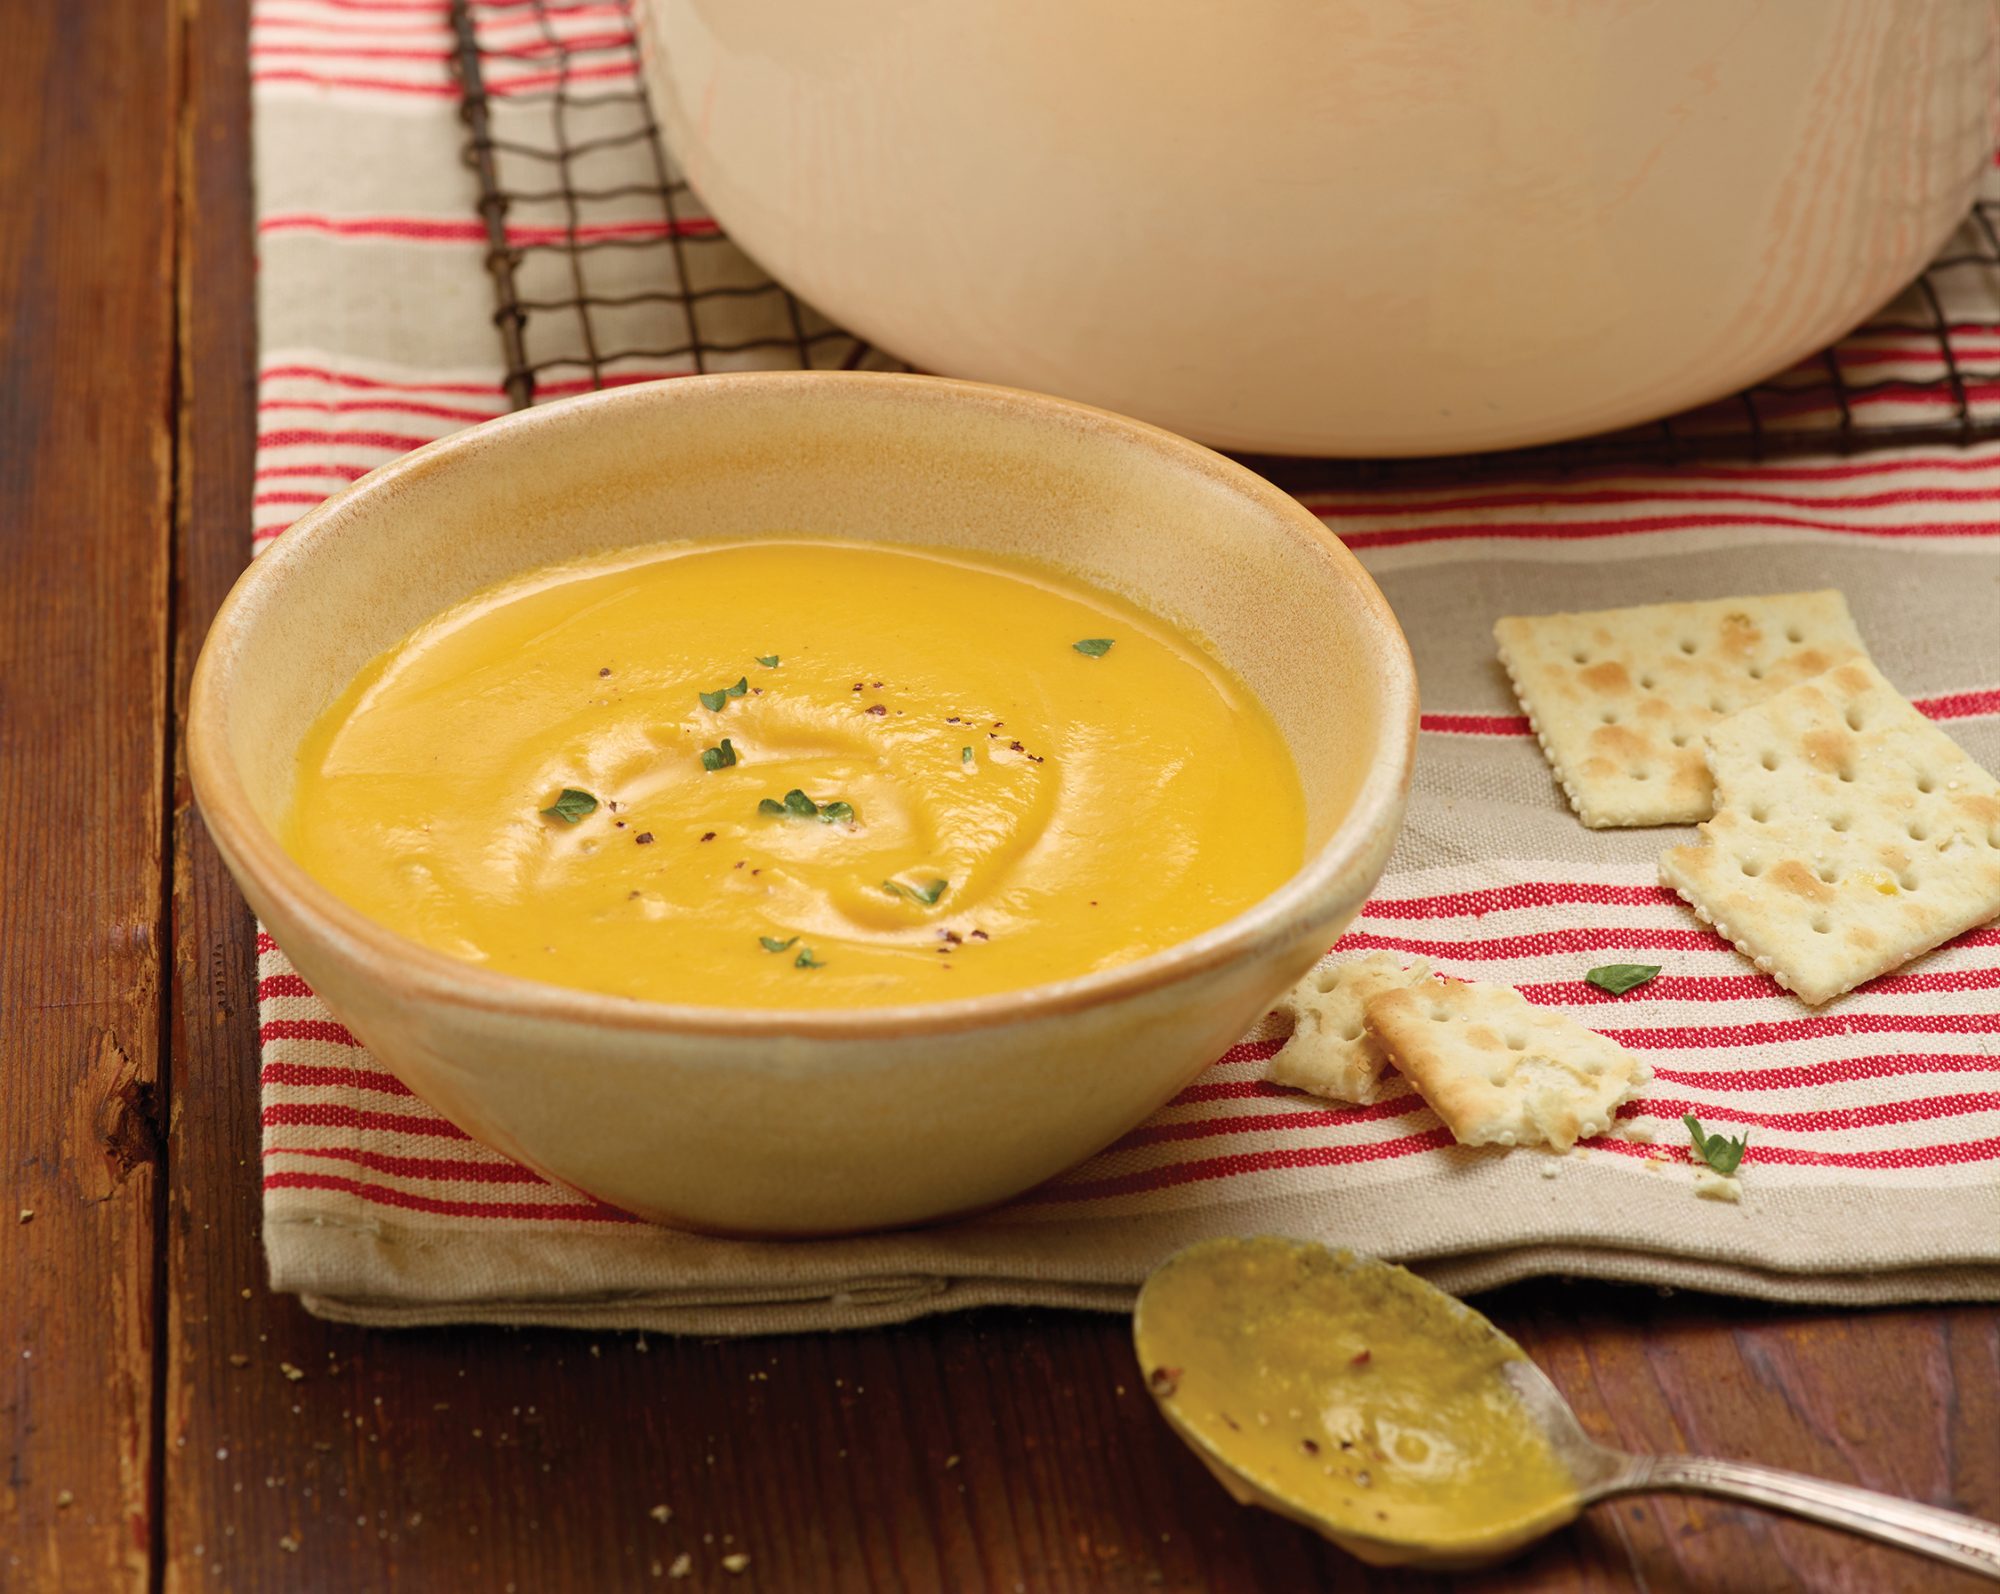 Creamy Root Vegetable Soup